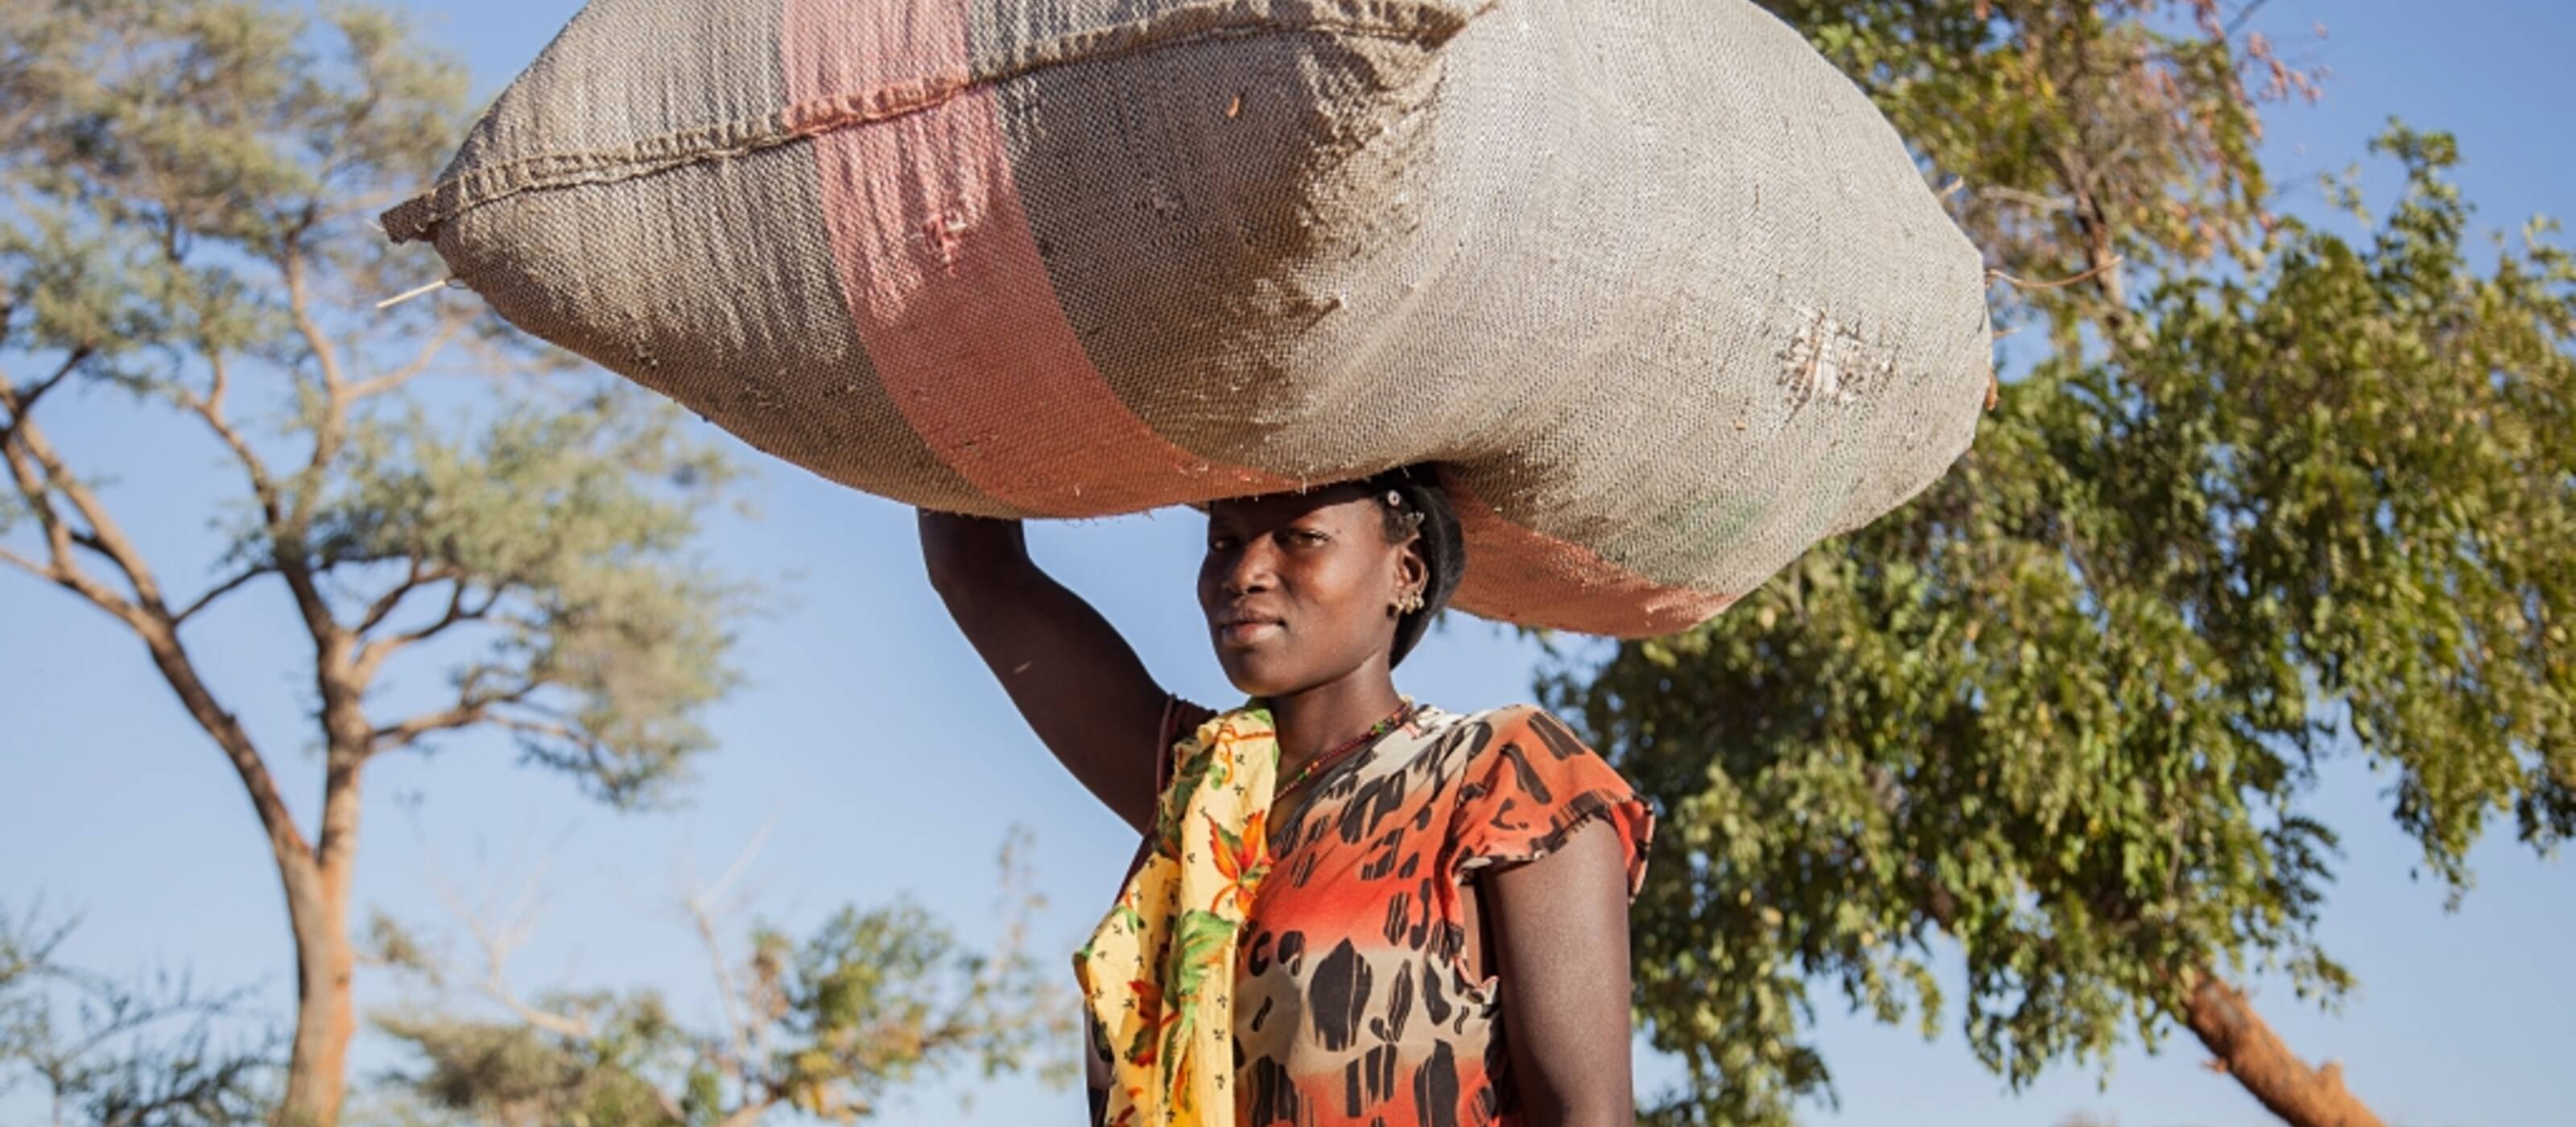 Fatima Tessougue, aged 40, carries a bag of manure on her head in order to fertilise the field. 